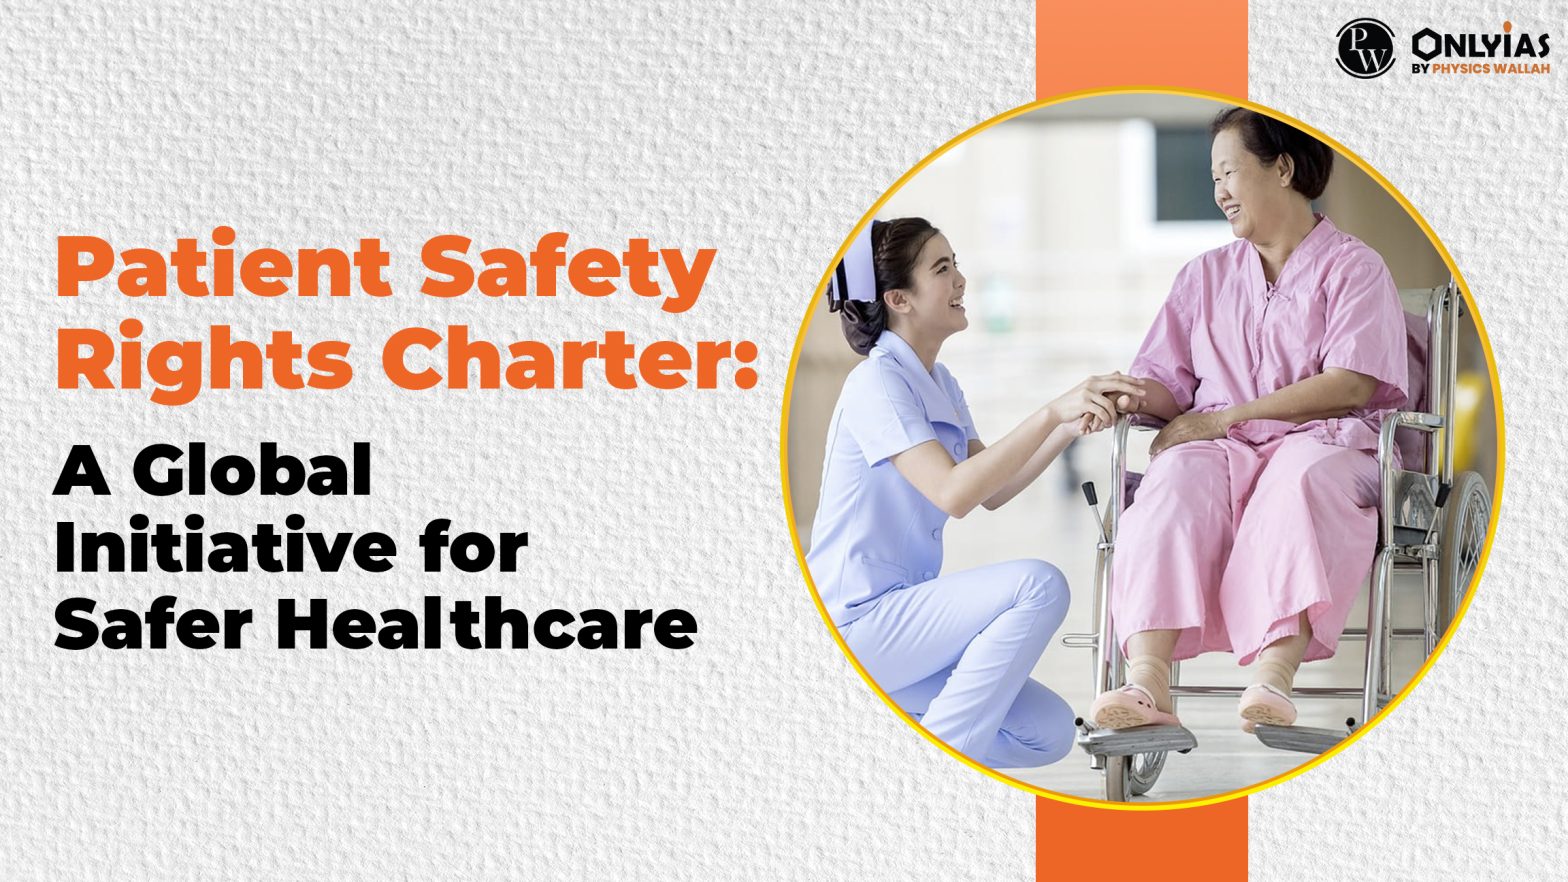 Health & Safety Charter